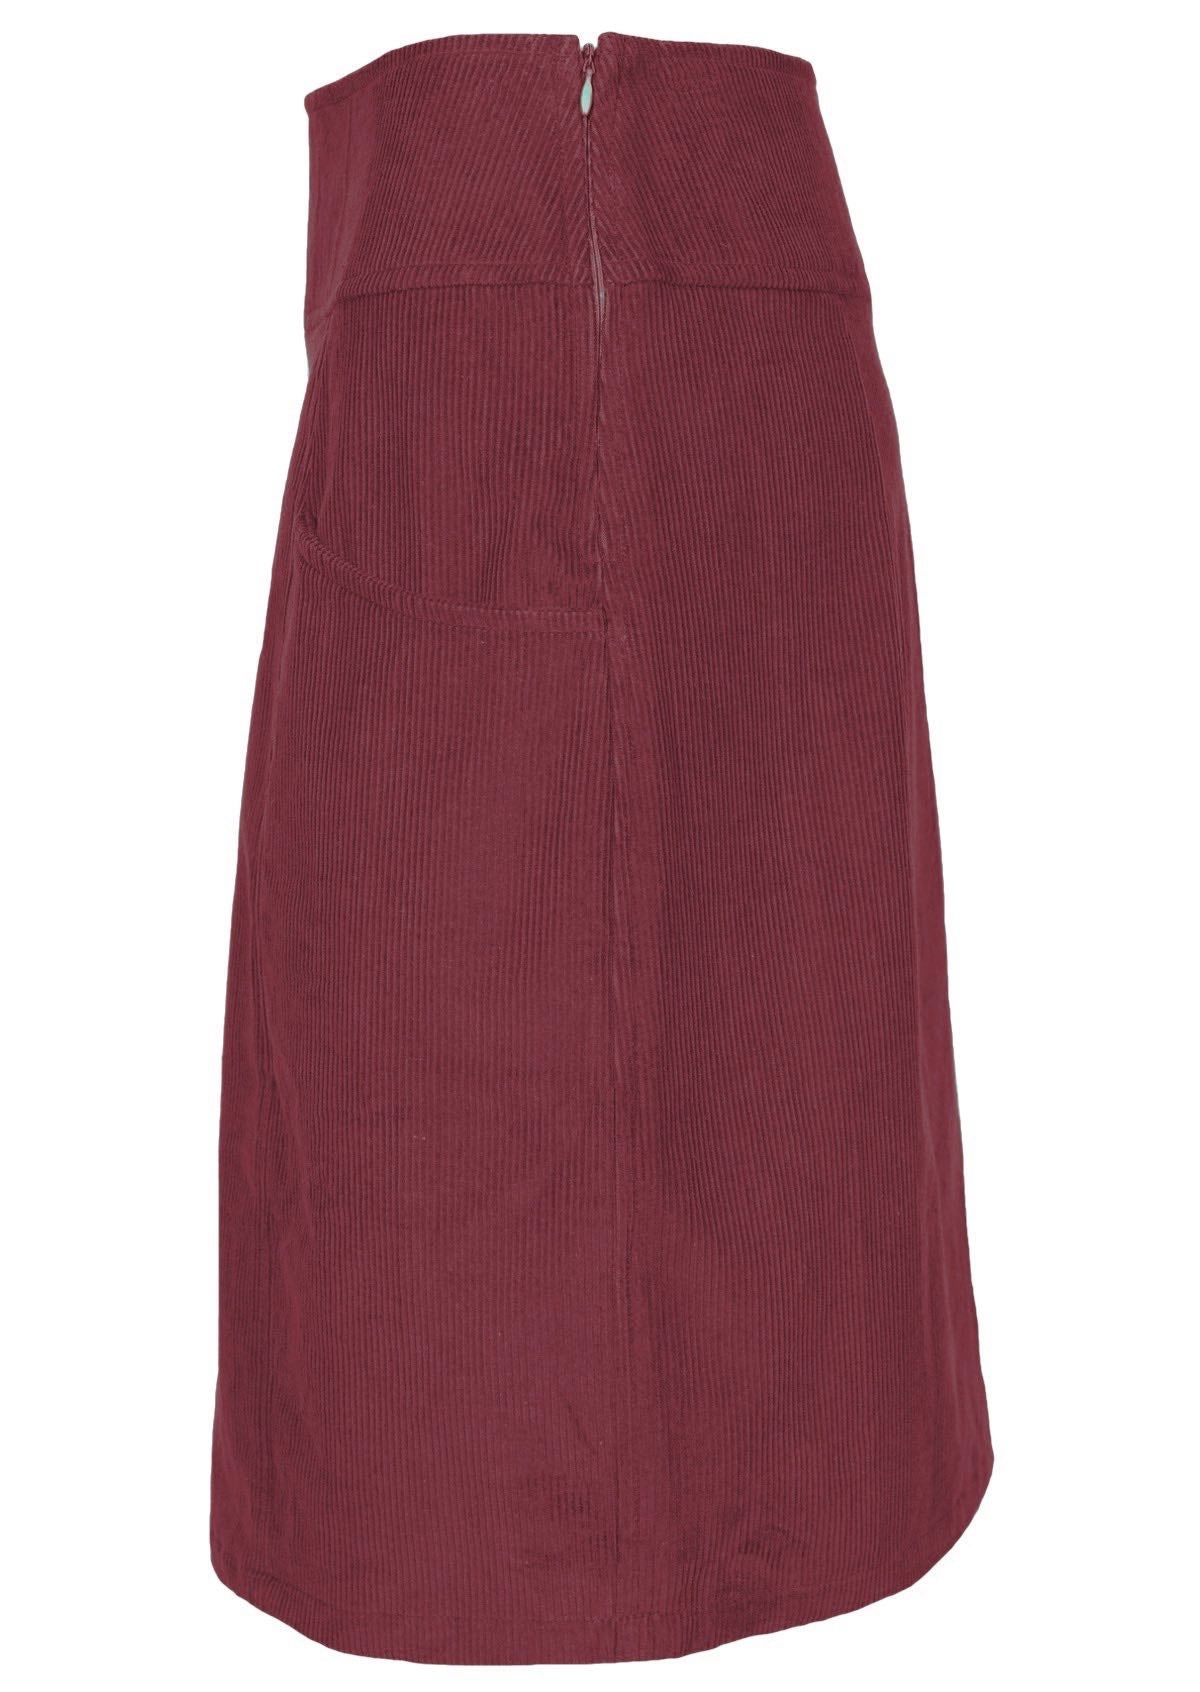 Red corduroy skirt is made out of 100% cotton and features a hidden side zip. 